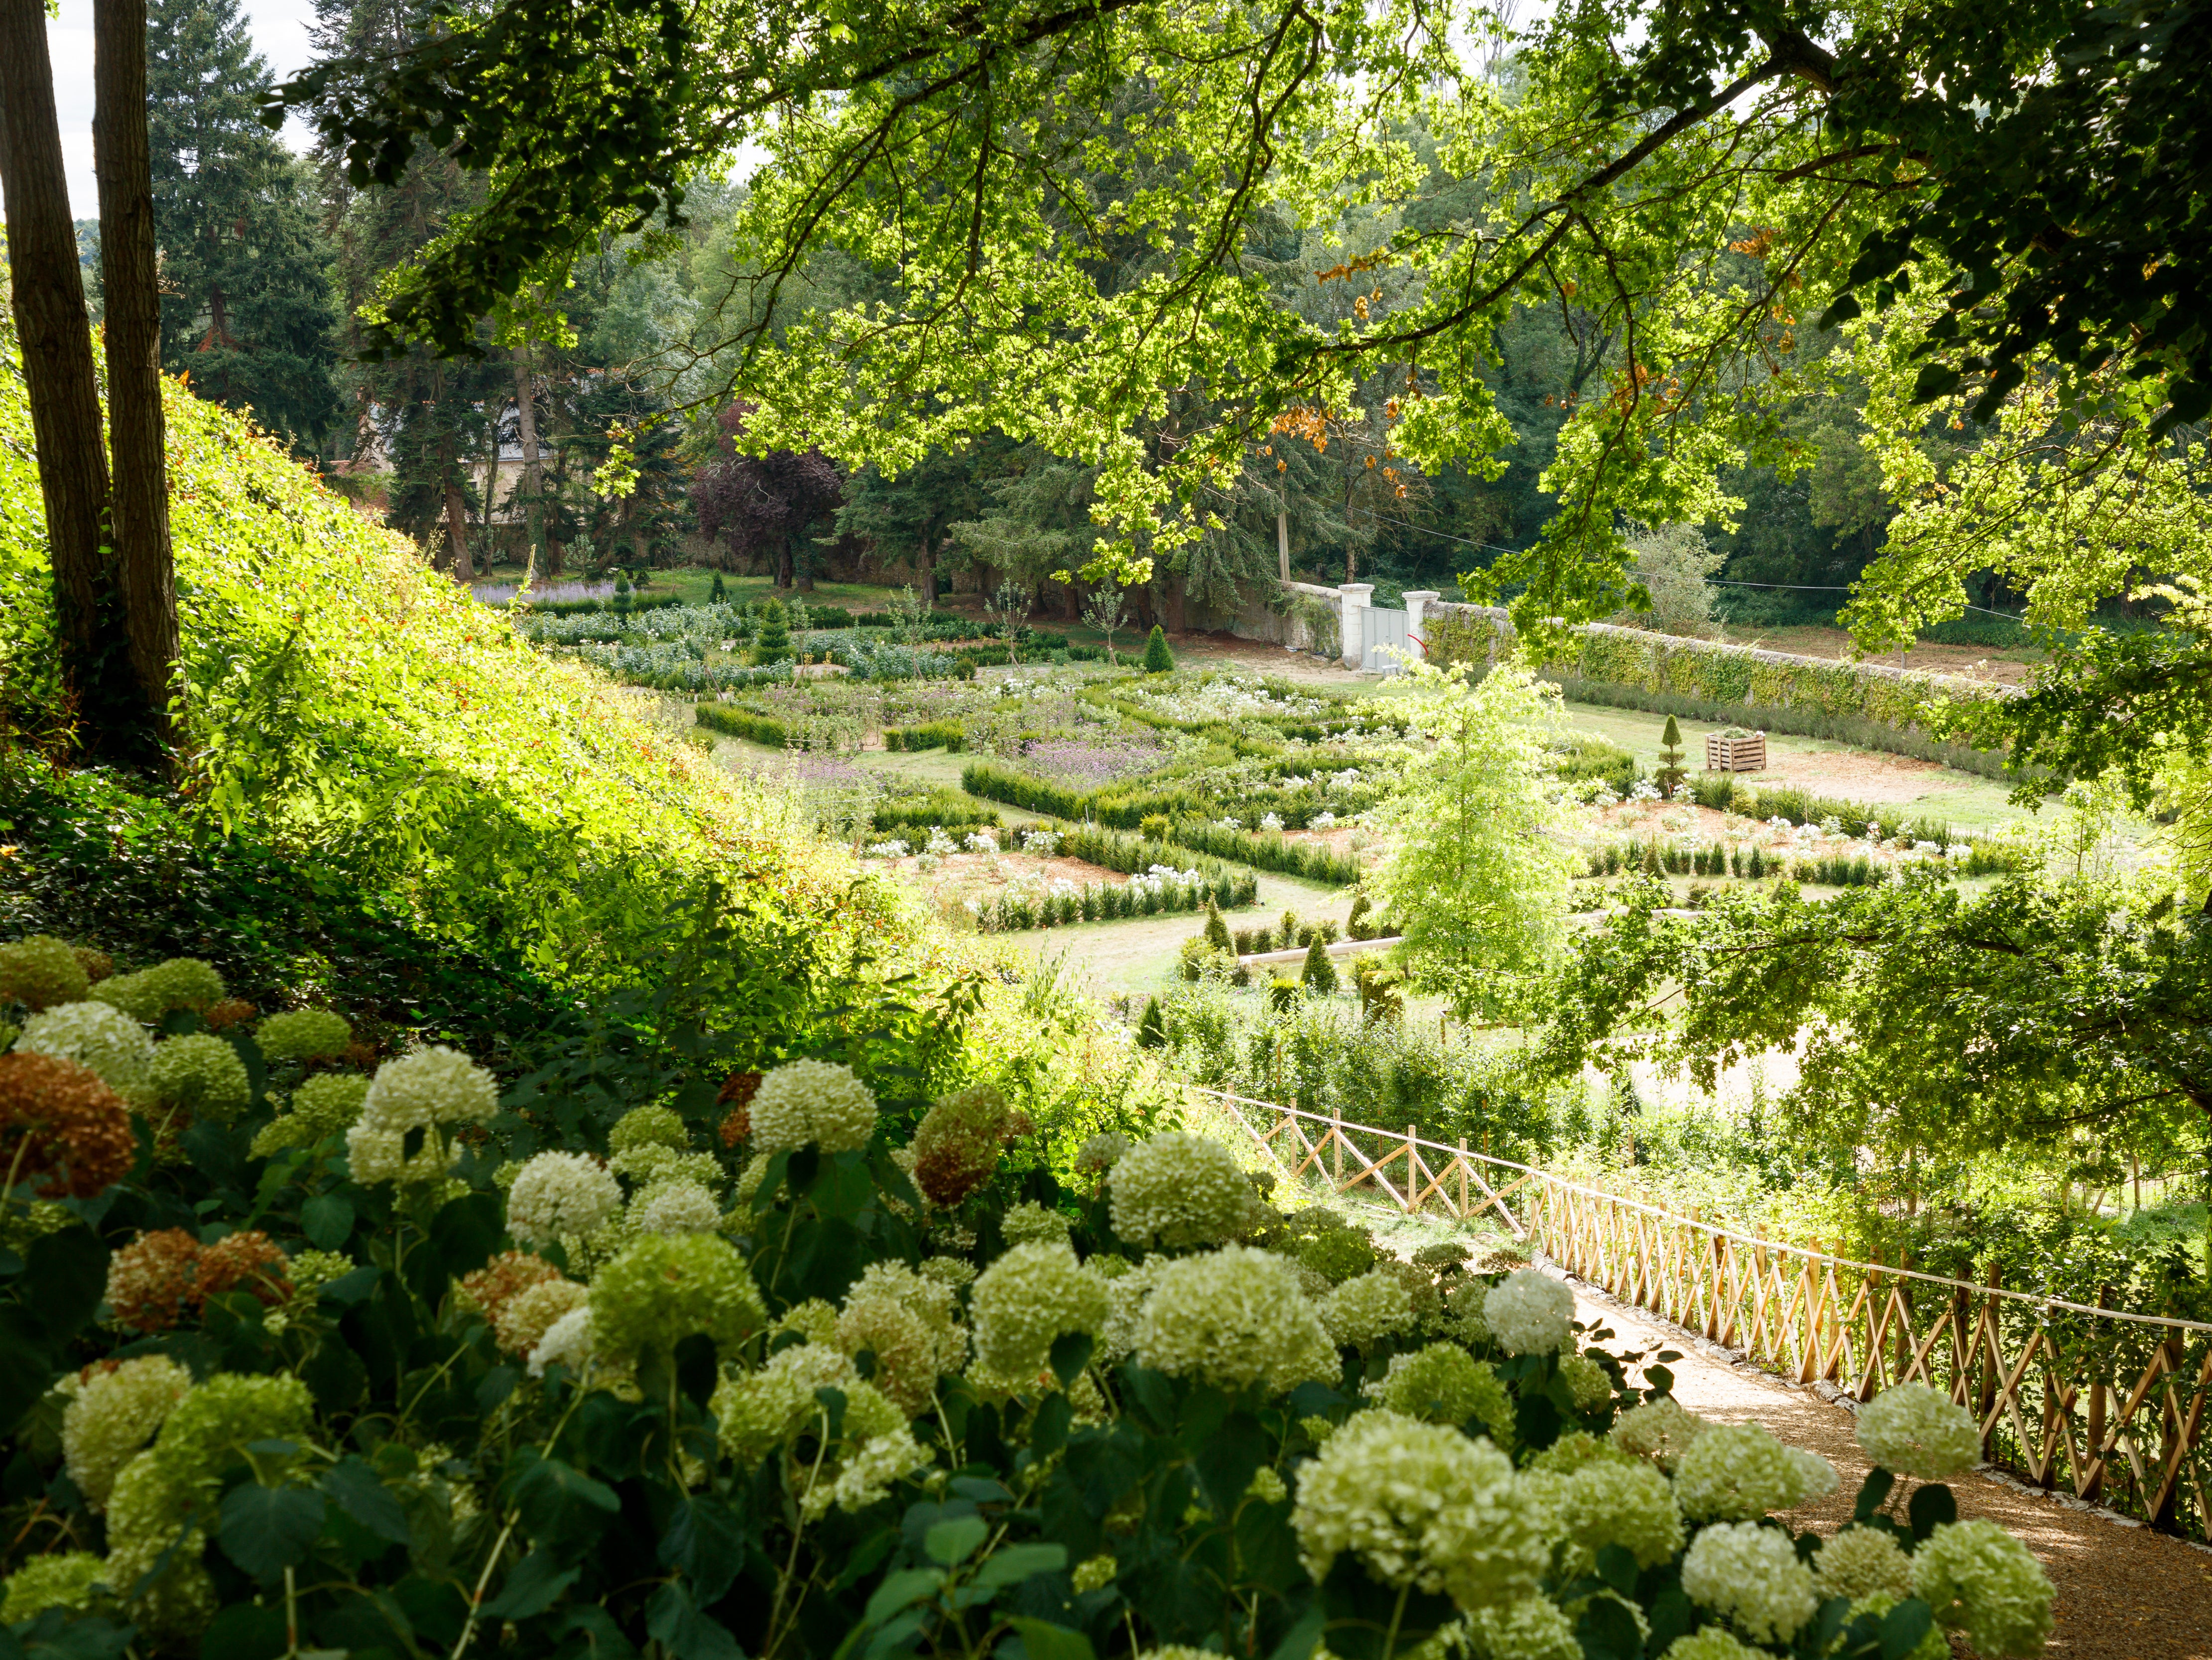 Like any self-respecting chateau, Louise de La Valliere has a well-kept garden